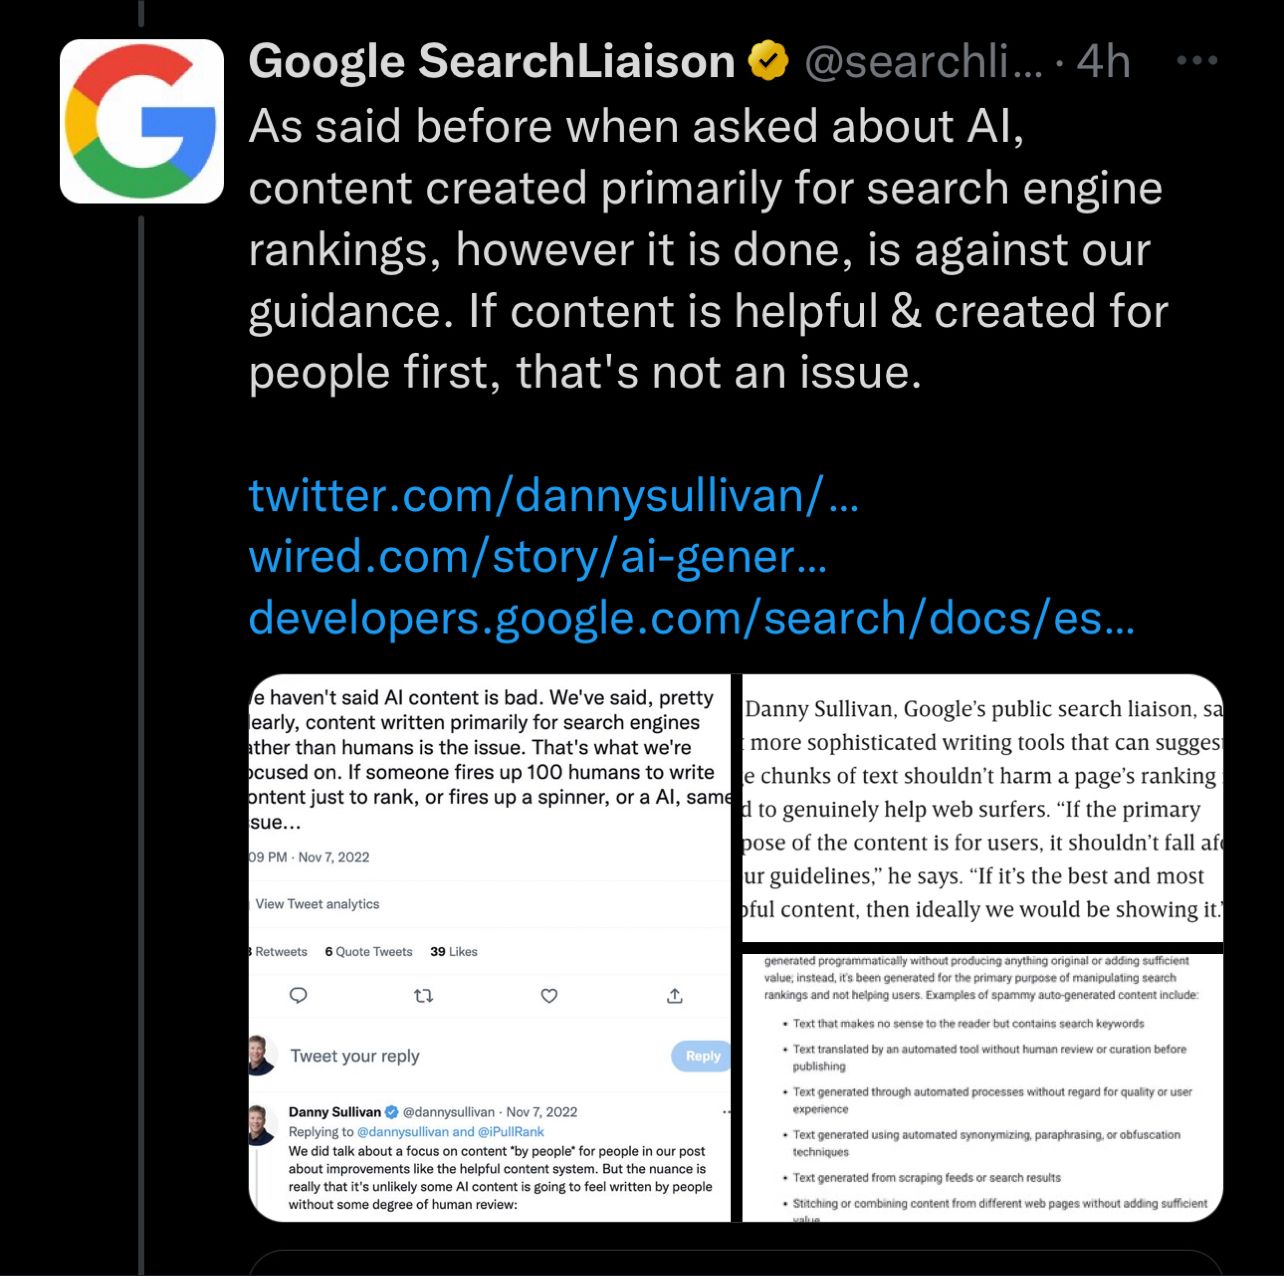 Google is okay with AI content?